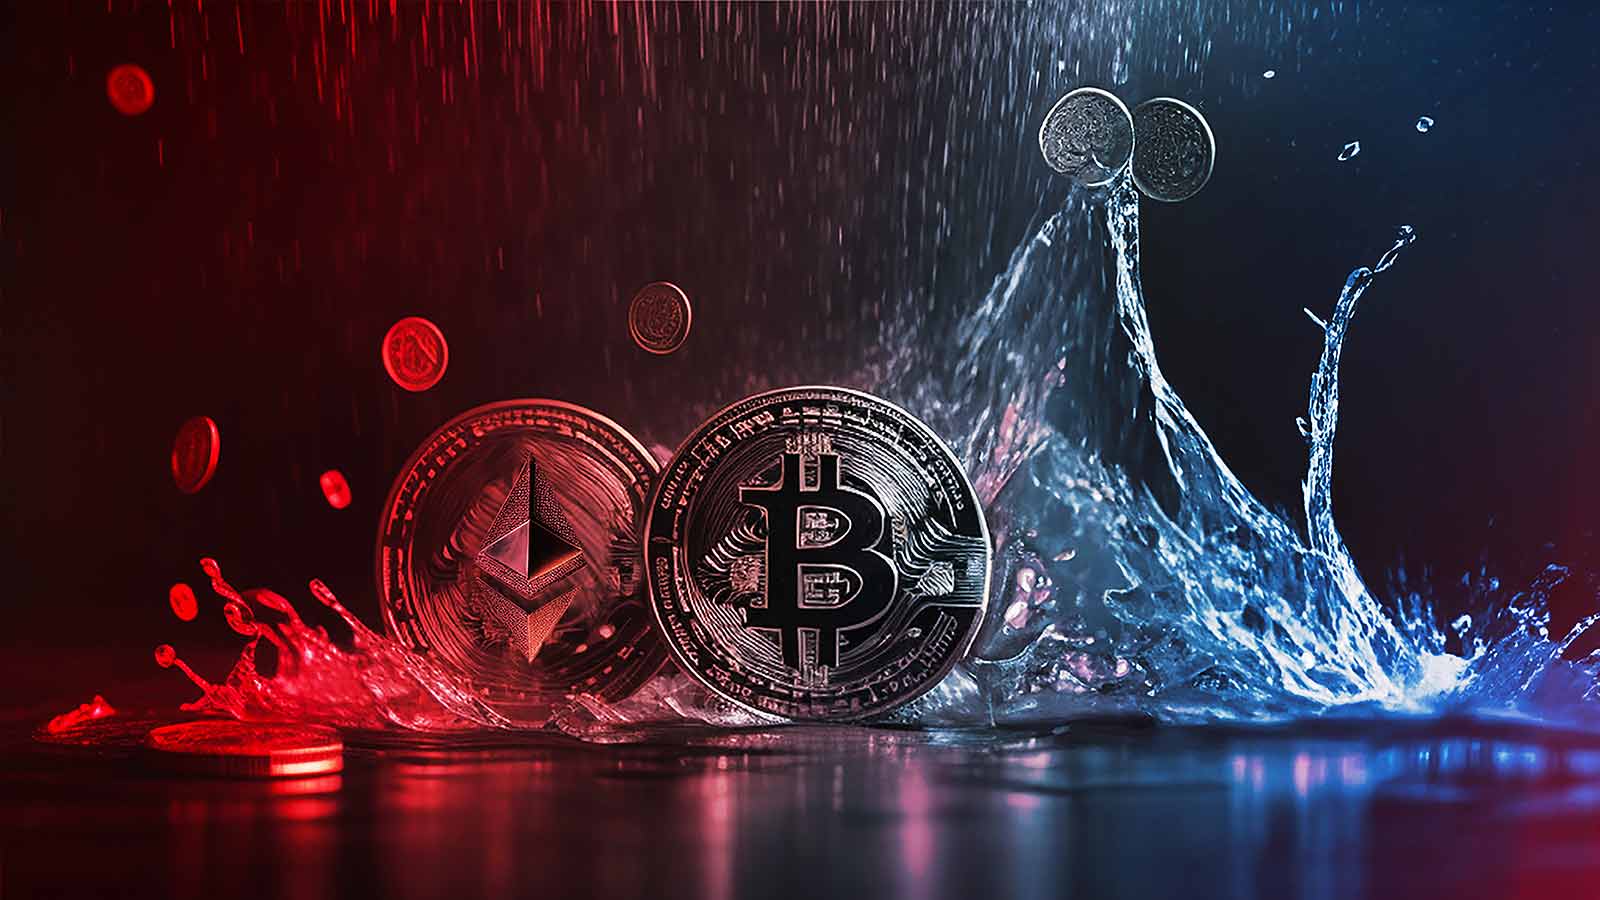 Crypto coins splashing in water, representing liquidity in crypto markets